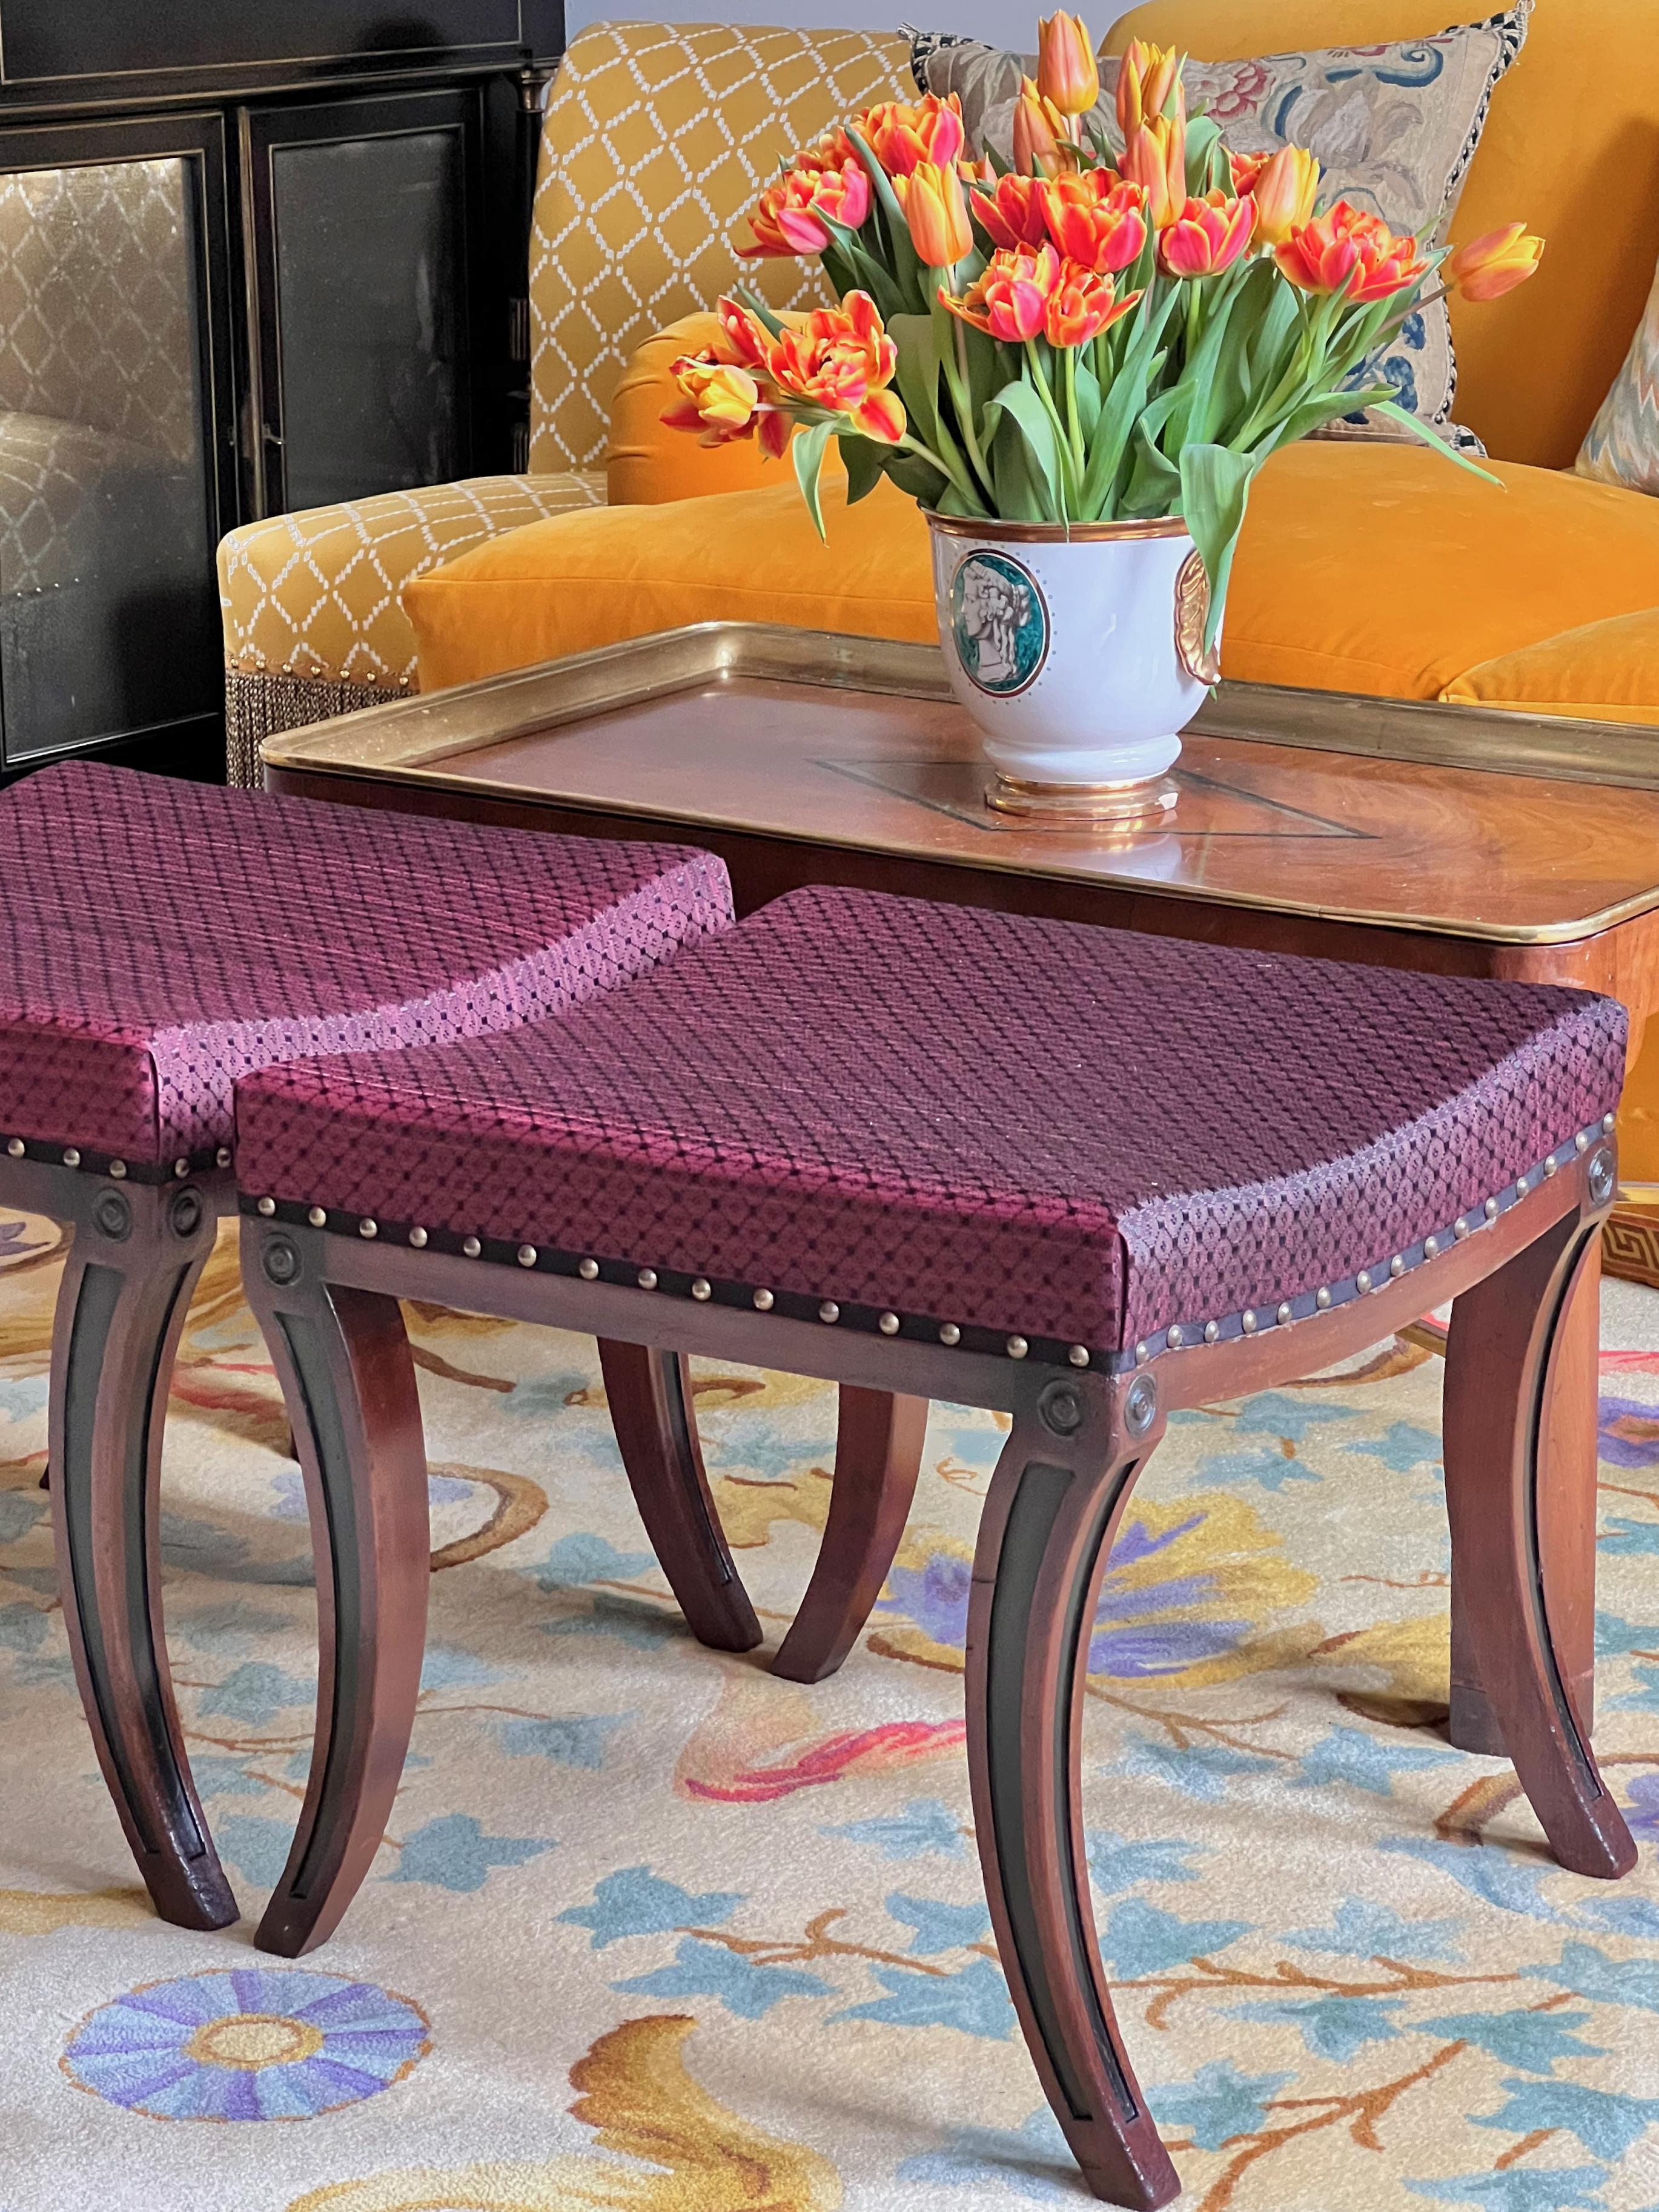 A pair of Regency style 'Klismos' stools or benches, upholstered in John Boyd Textiles horsehair fabric.

Why we like them
These super smart Klismos stools are inspired by ancient Greek examples, often found depicted on Attic and Apulian pottery and